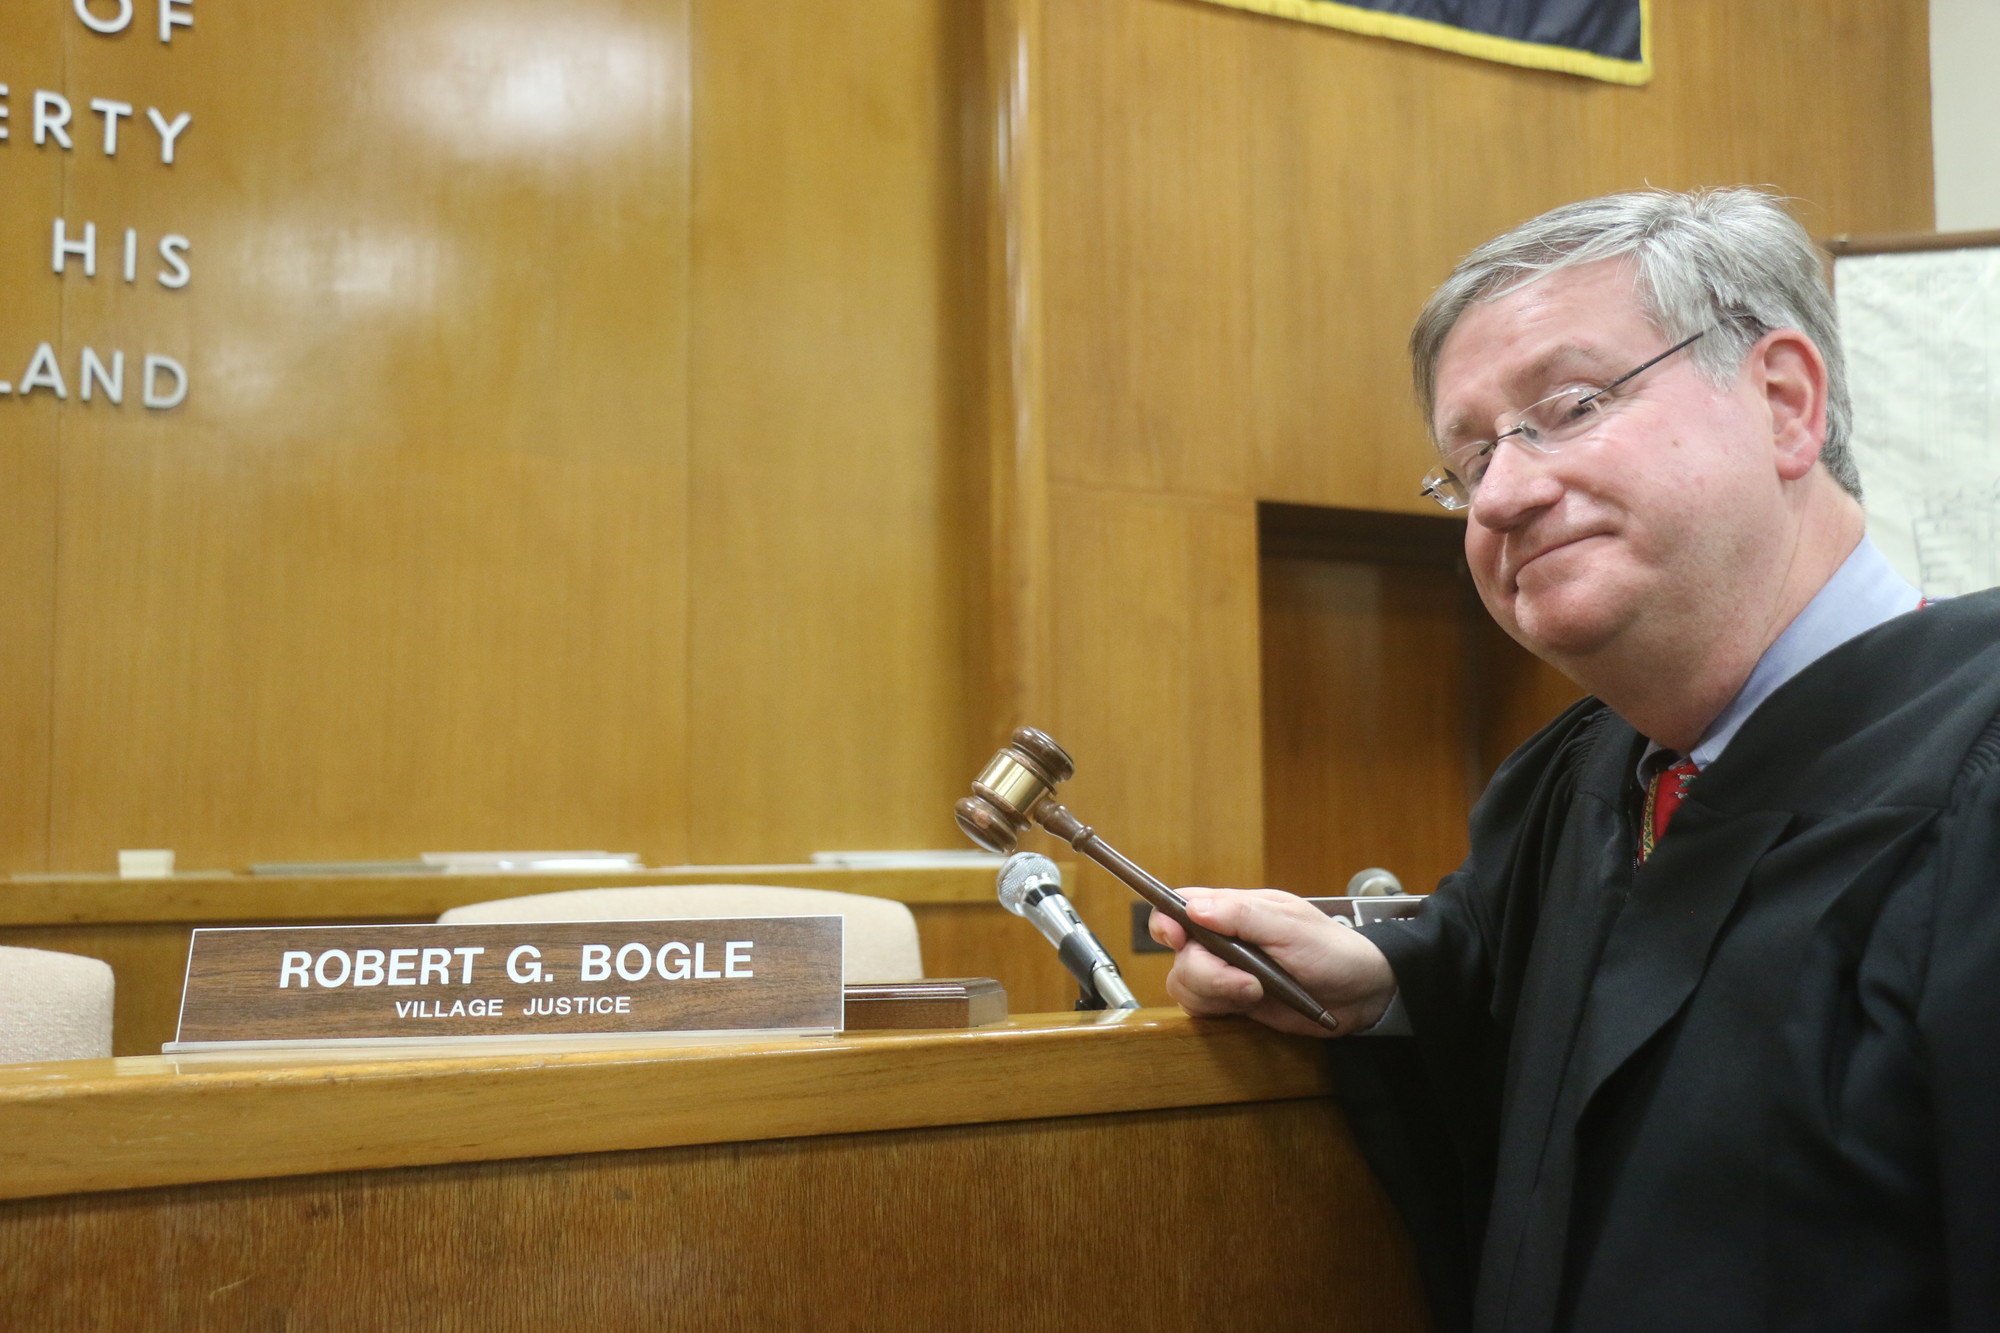 Village Justice Robert Bogle plans to step down at the end of the year to assume his County Court judgeship.